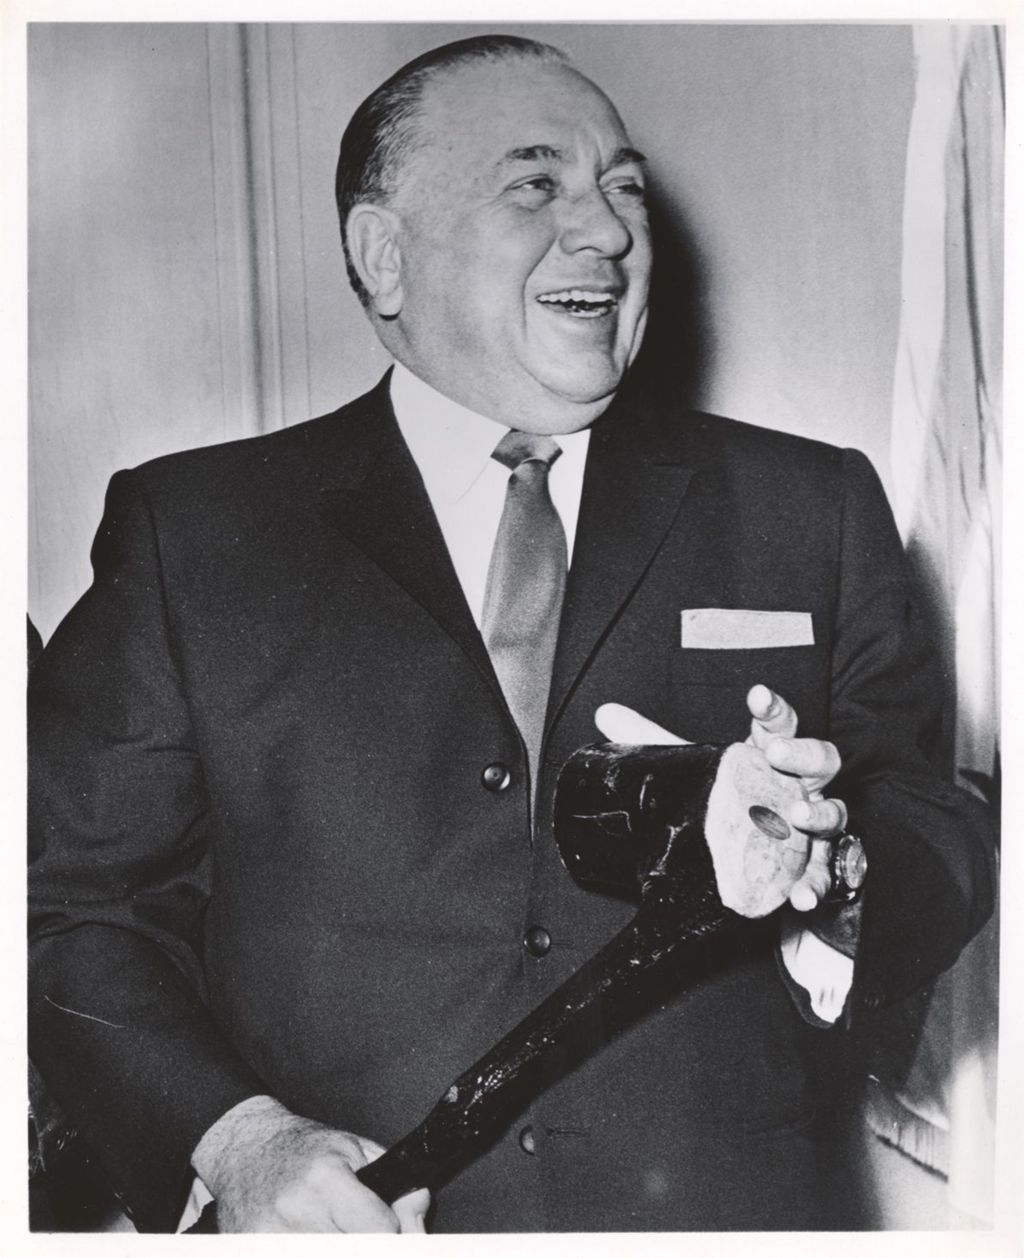 Miniature of Richard J. Daley with a shillelagh